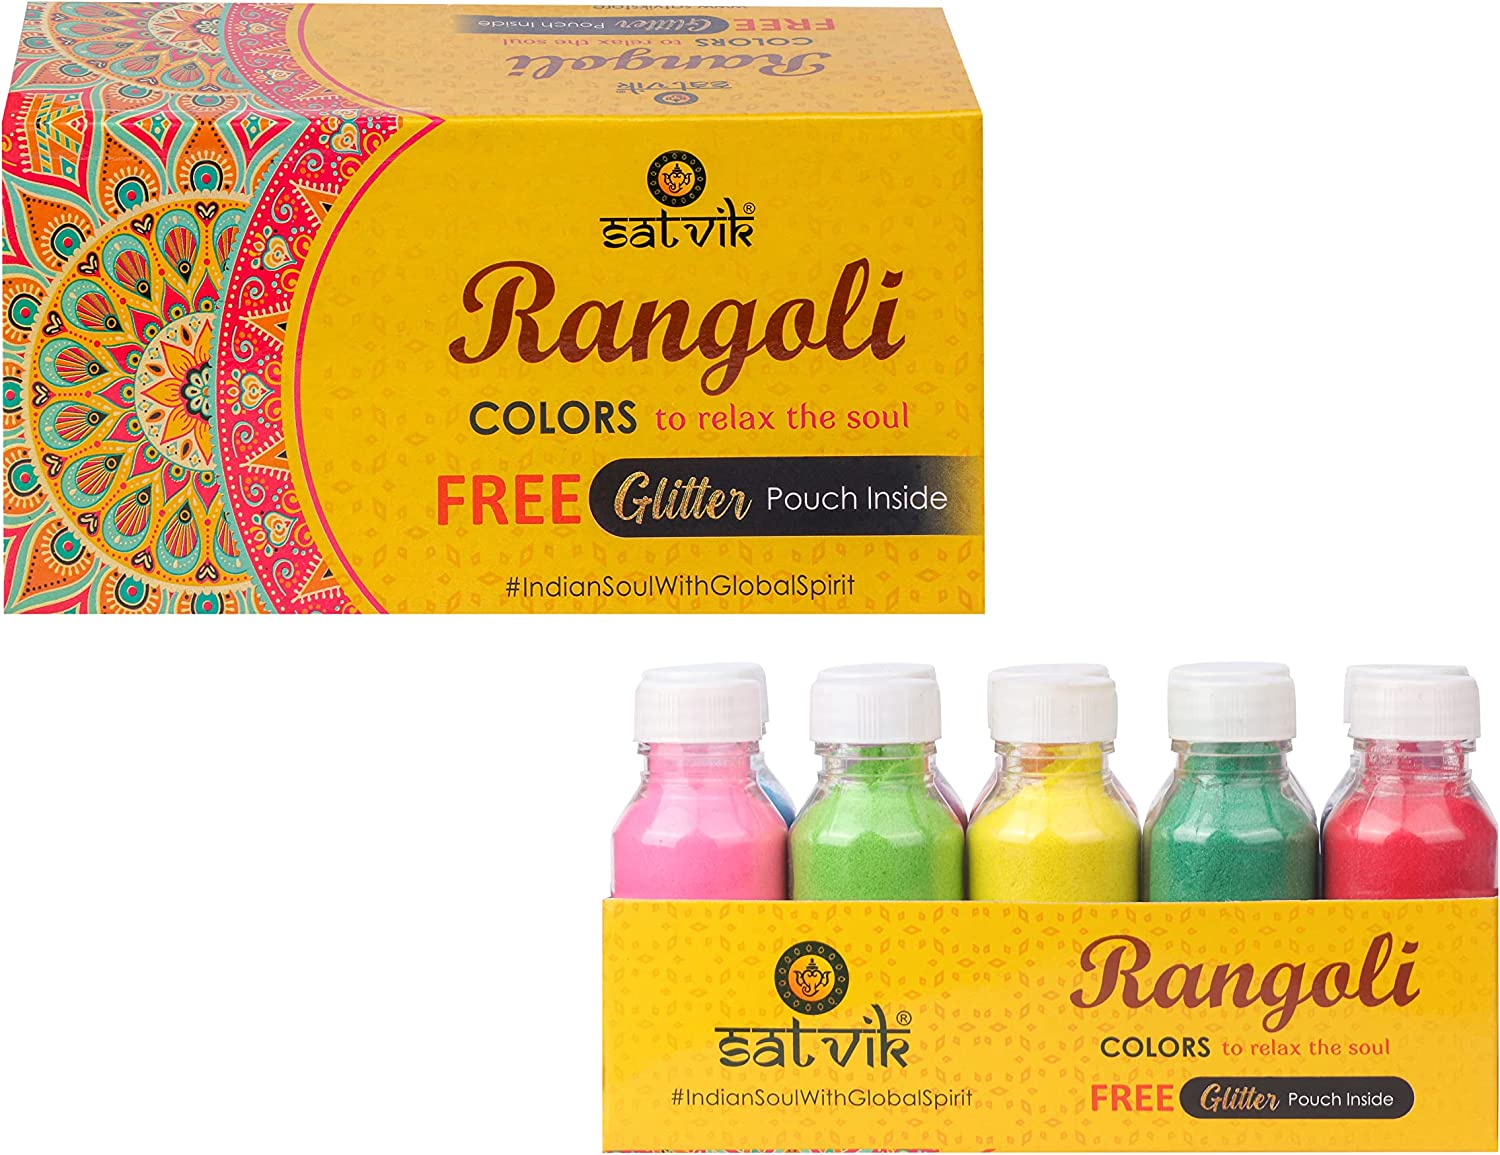 Satvik Rangoli Powder with 10 Colours for every Devotional Occasion, 500g.  Non-toxic and safe colour powders made of natural ing